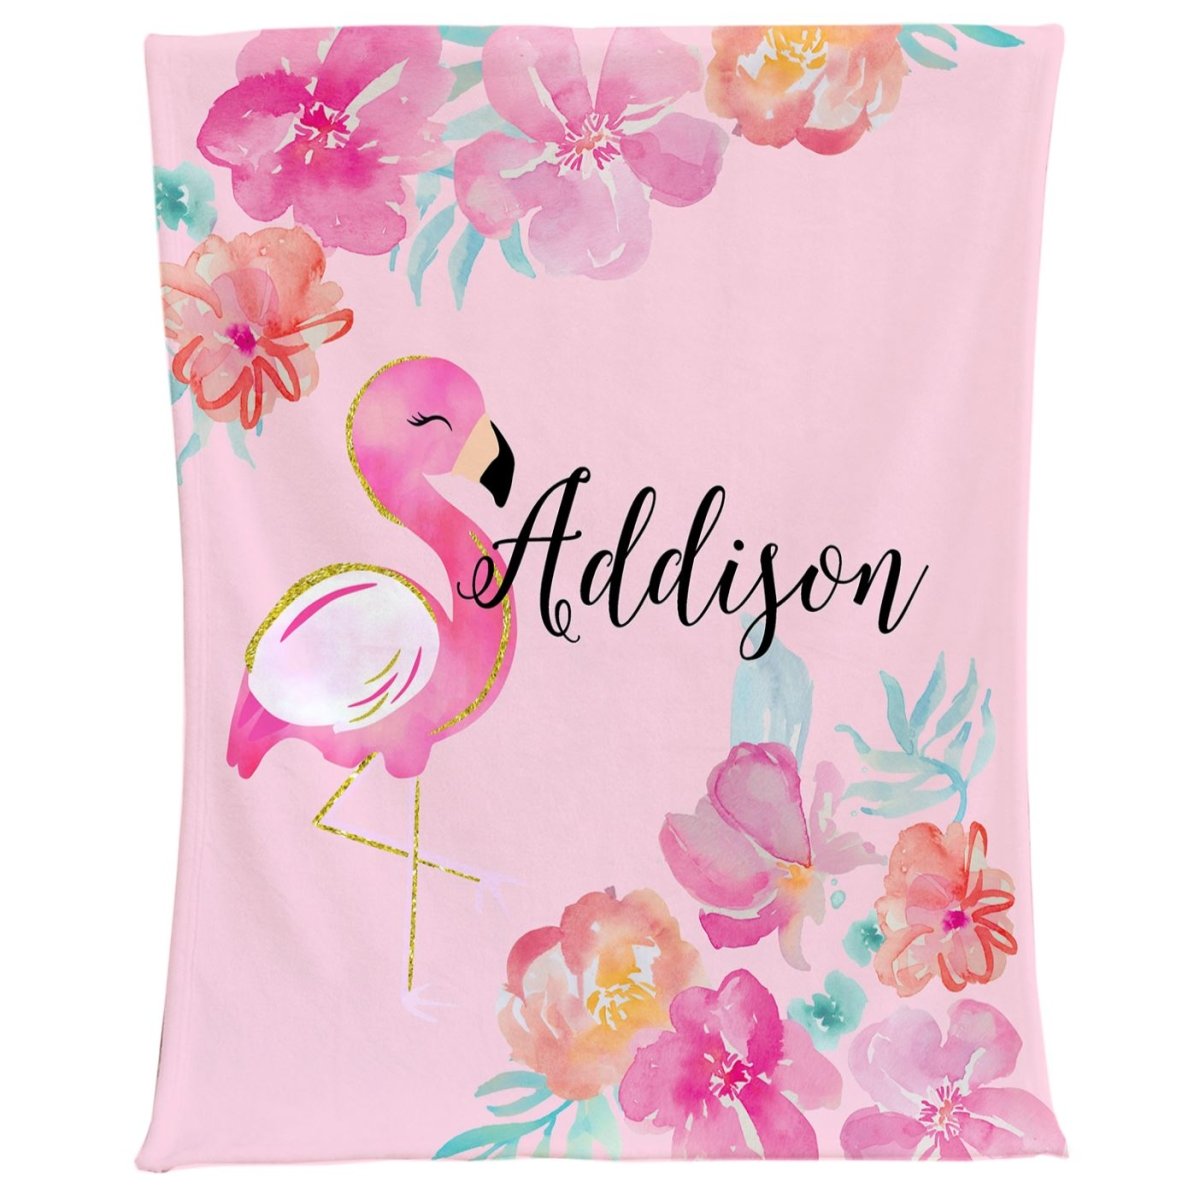 Tropical Flamingo Personalized Minky Blanket - gender_girl, Personalized_Yes, text